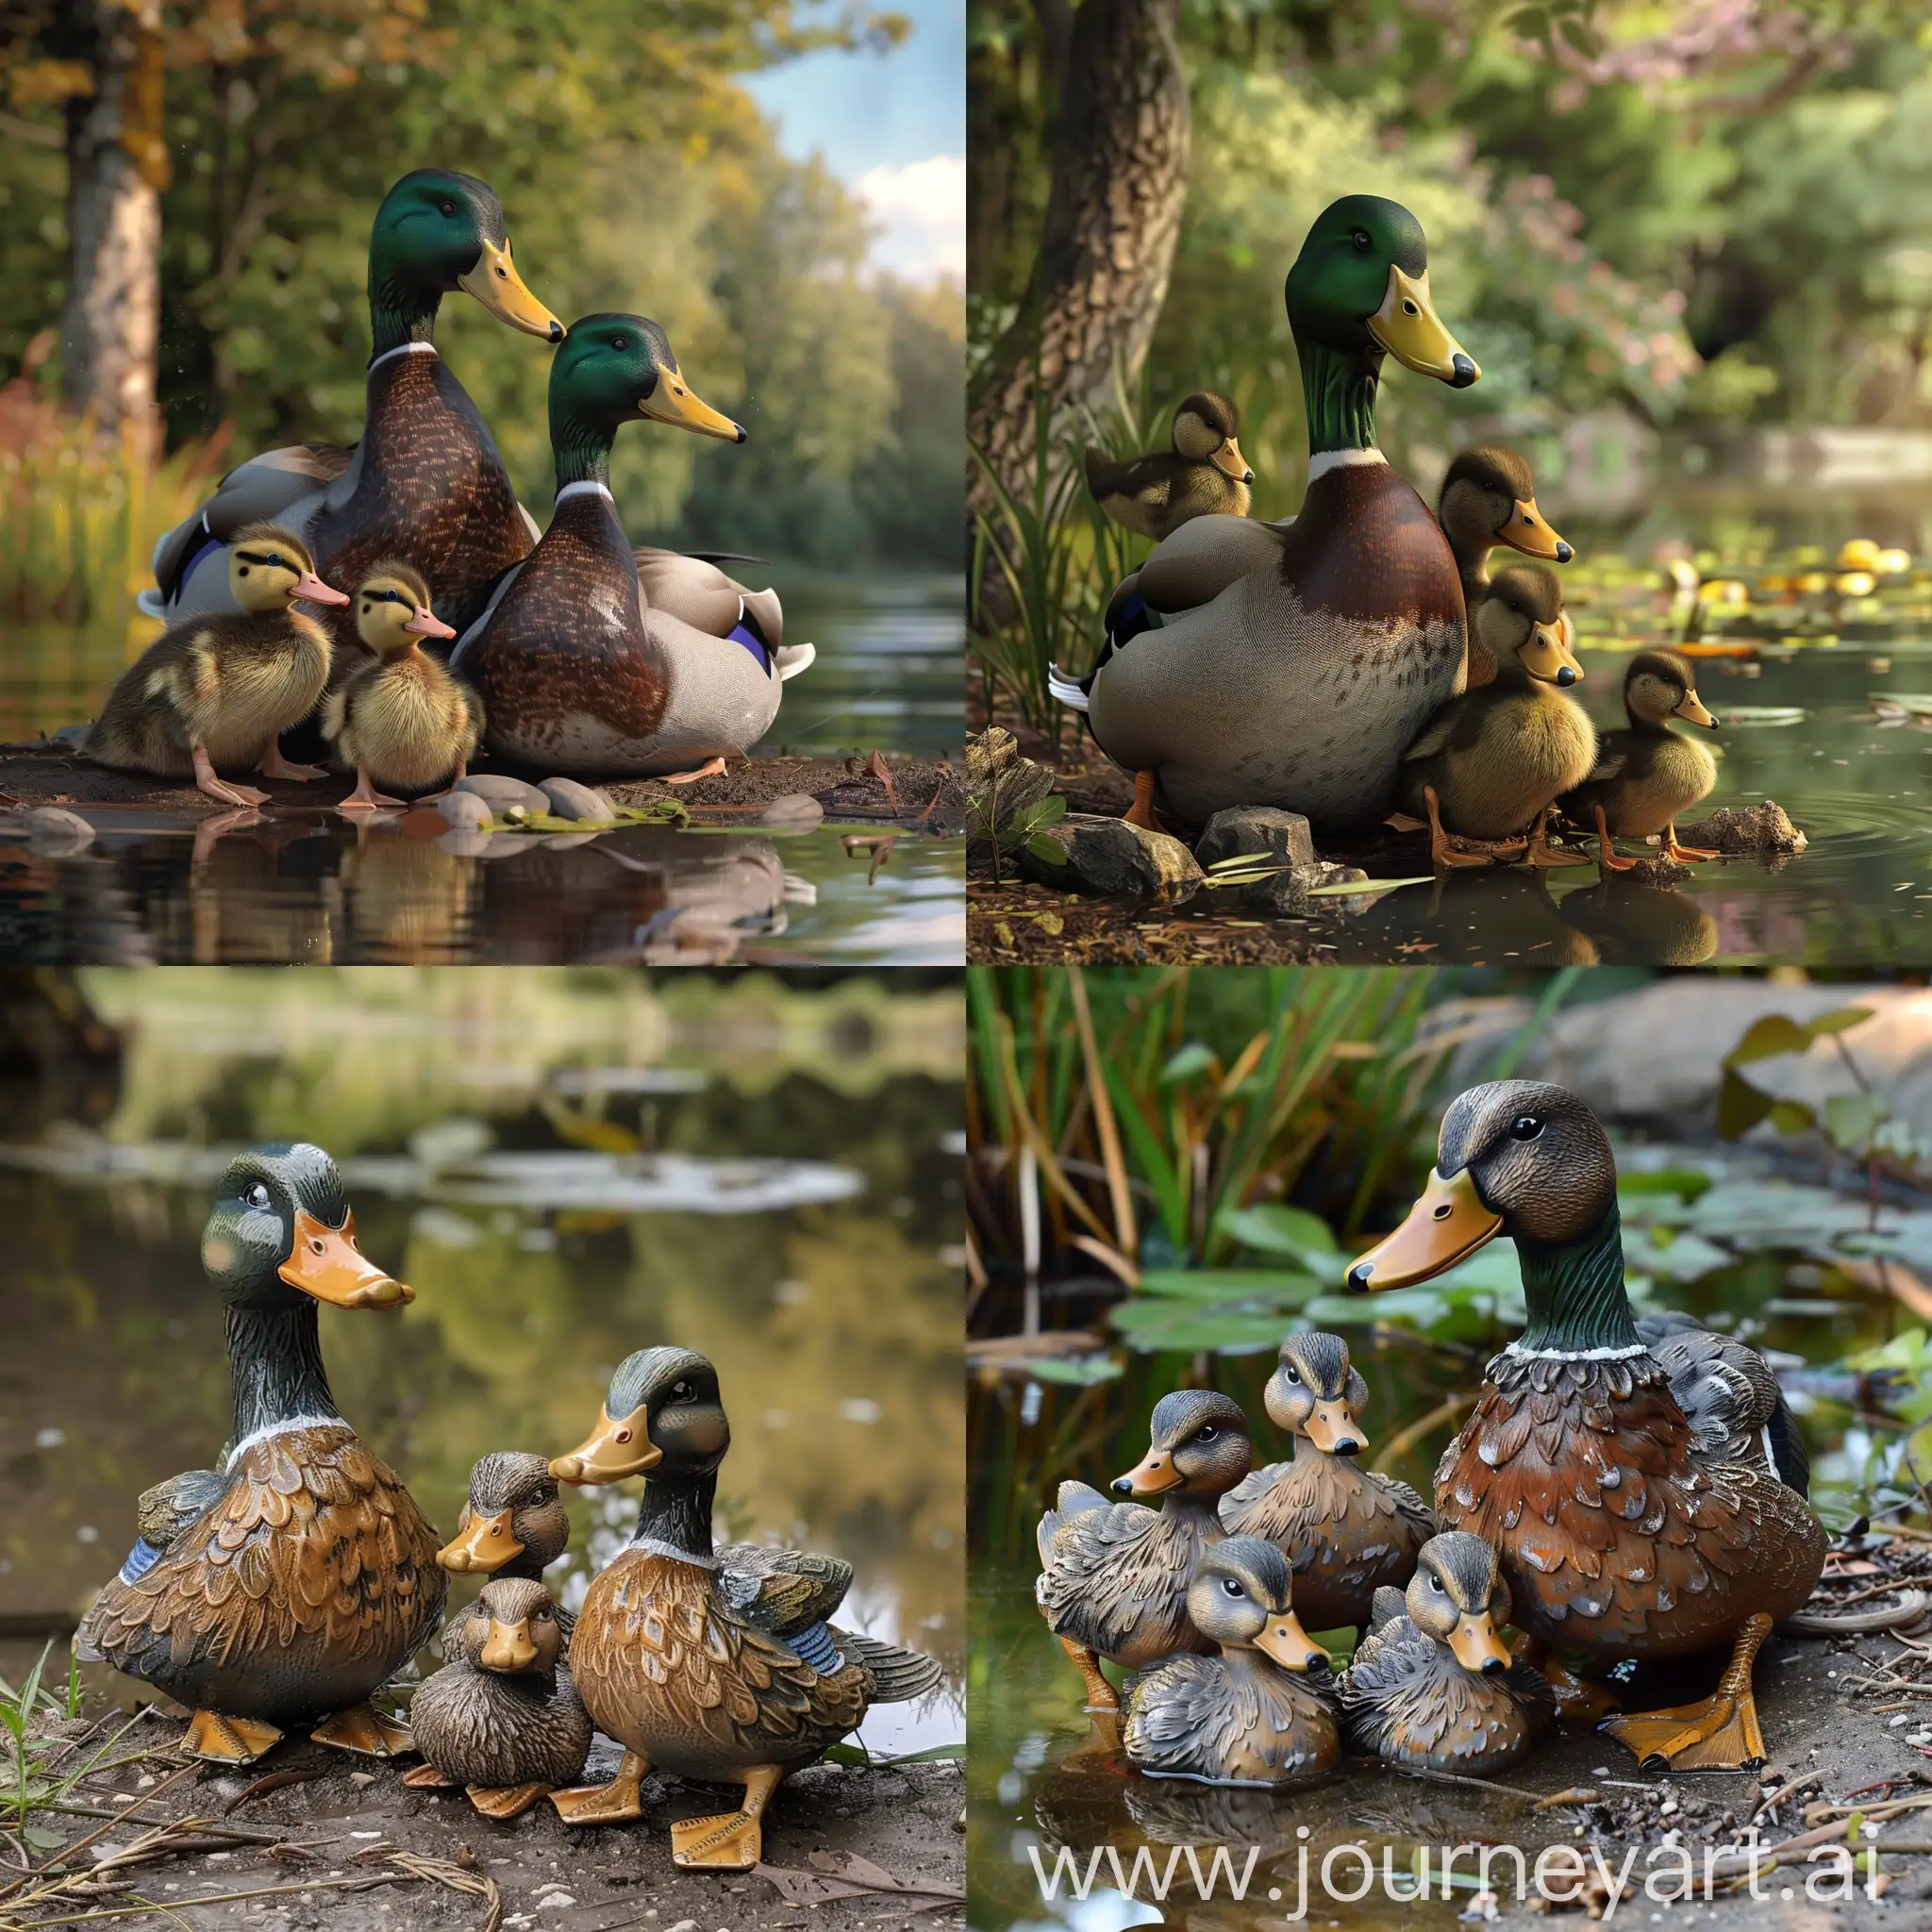 A realistic anthropomorphic duck family sitting together next to a pond